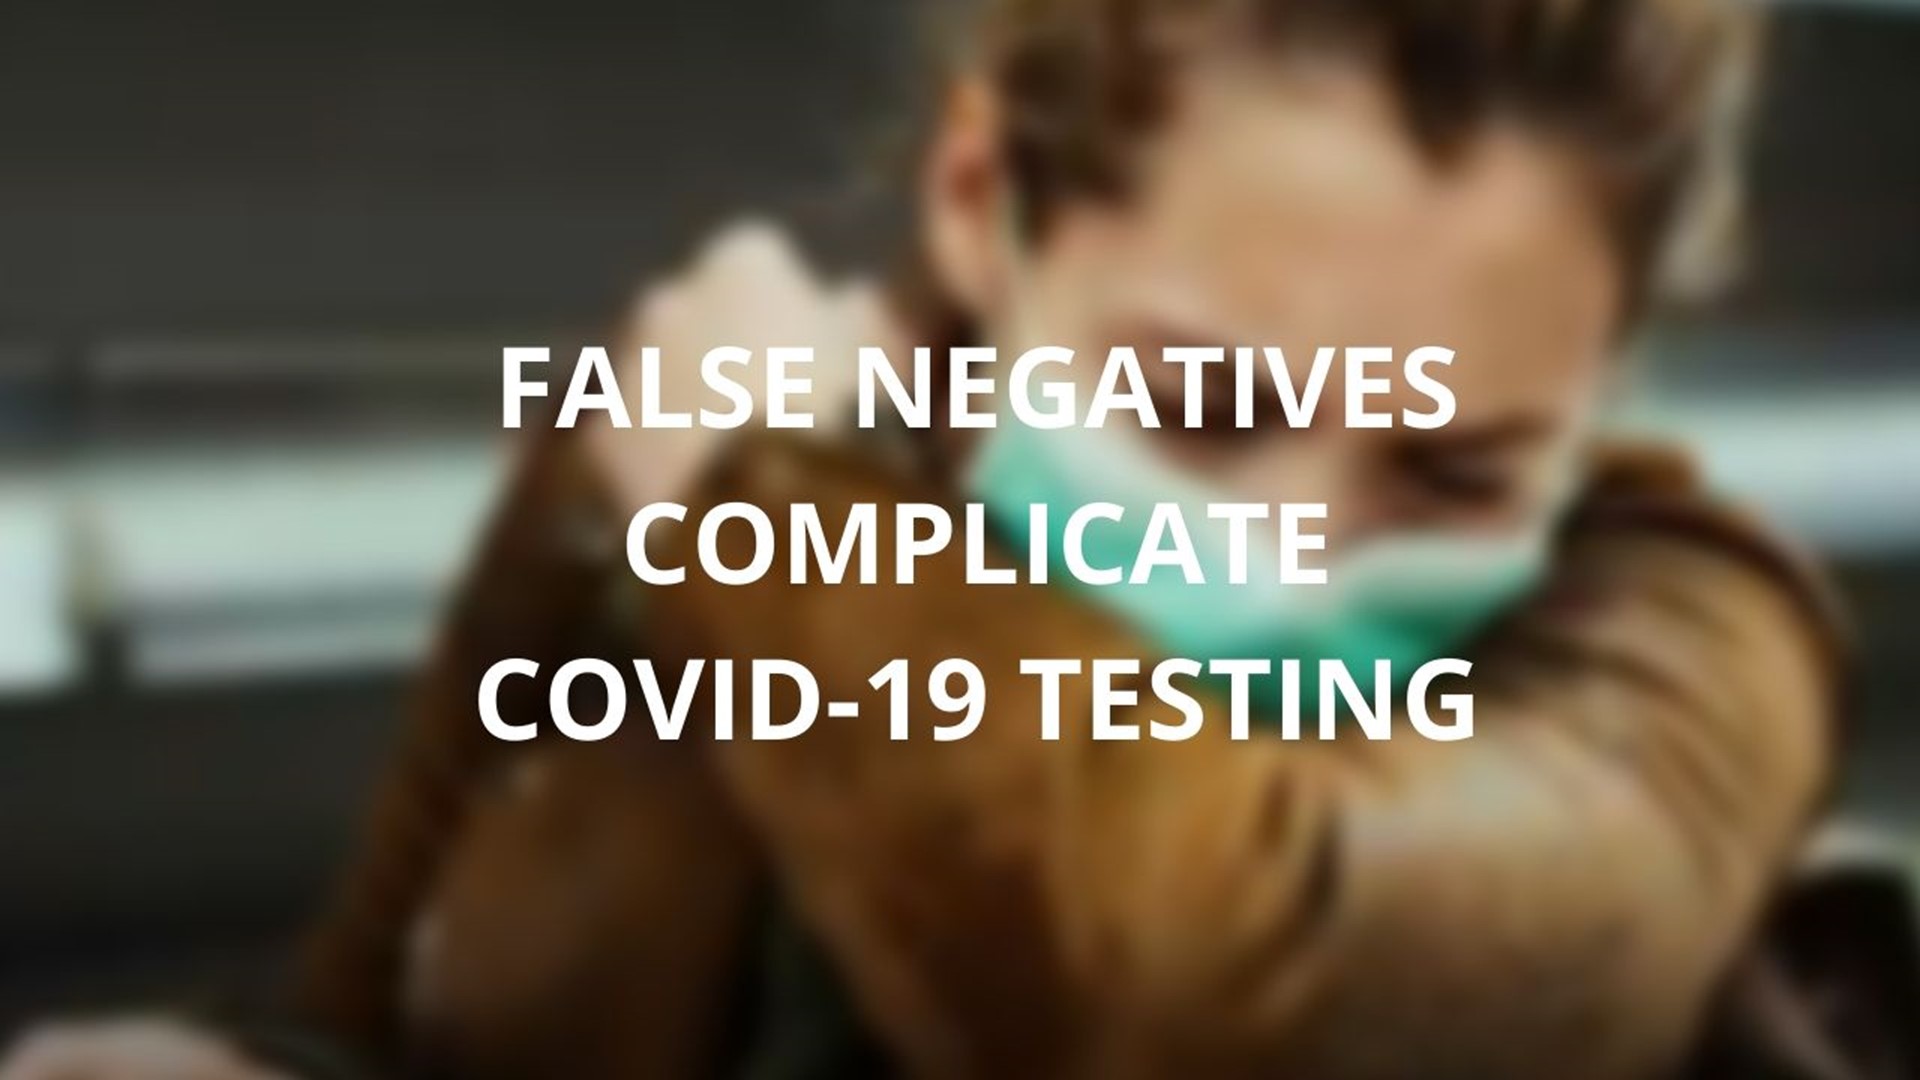 A doctor says in 30% of COVID-19 cases, the test misses the virus and an infected person can't truly know if they have it.